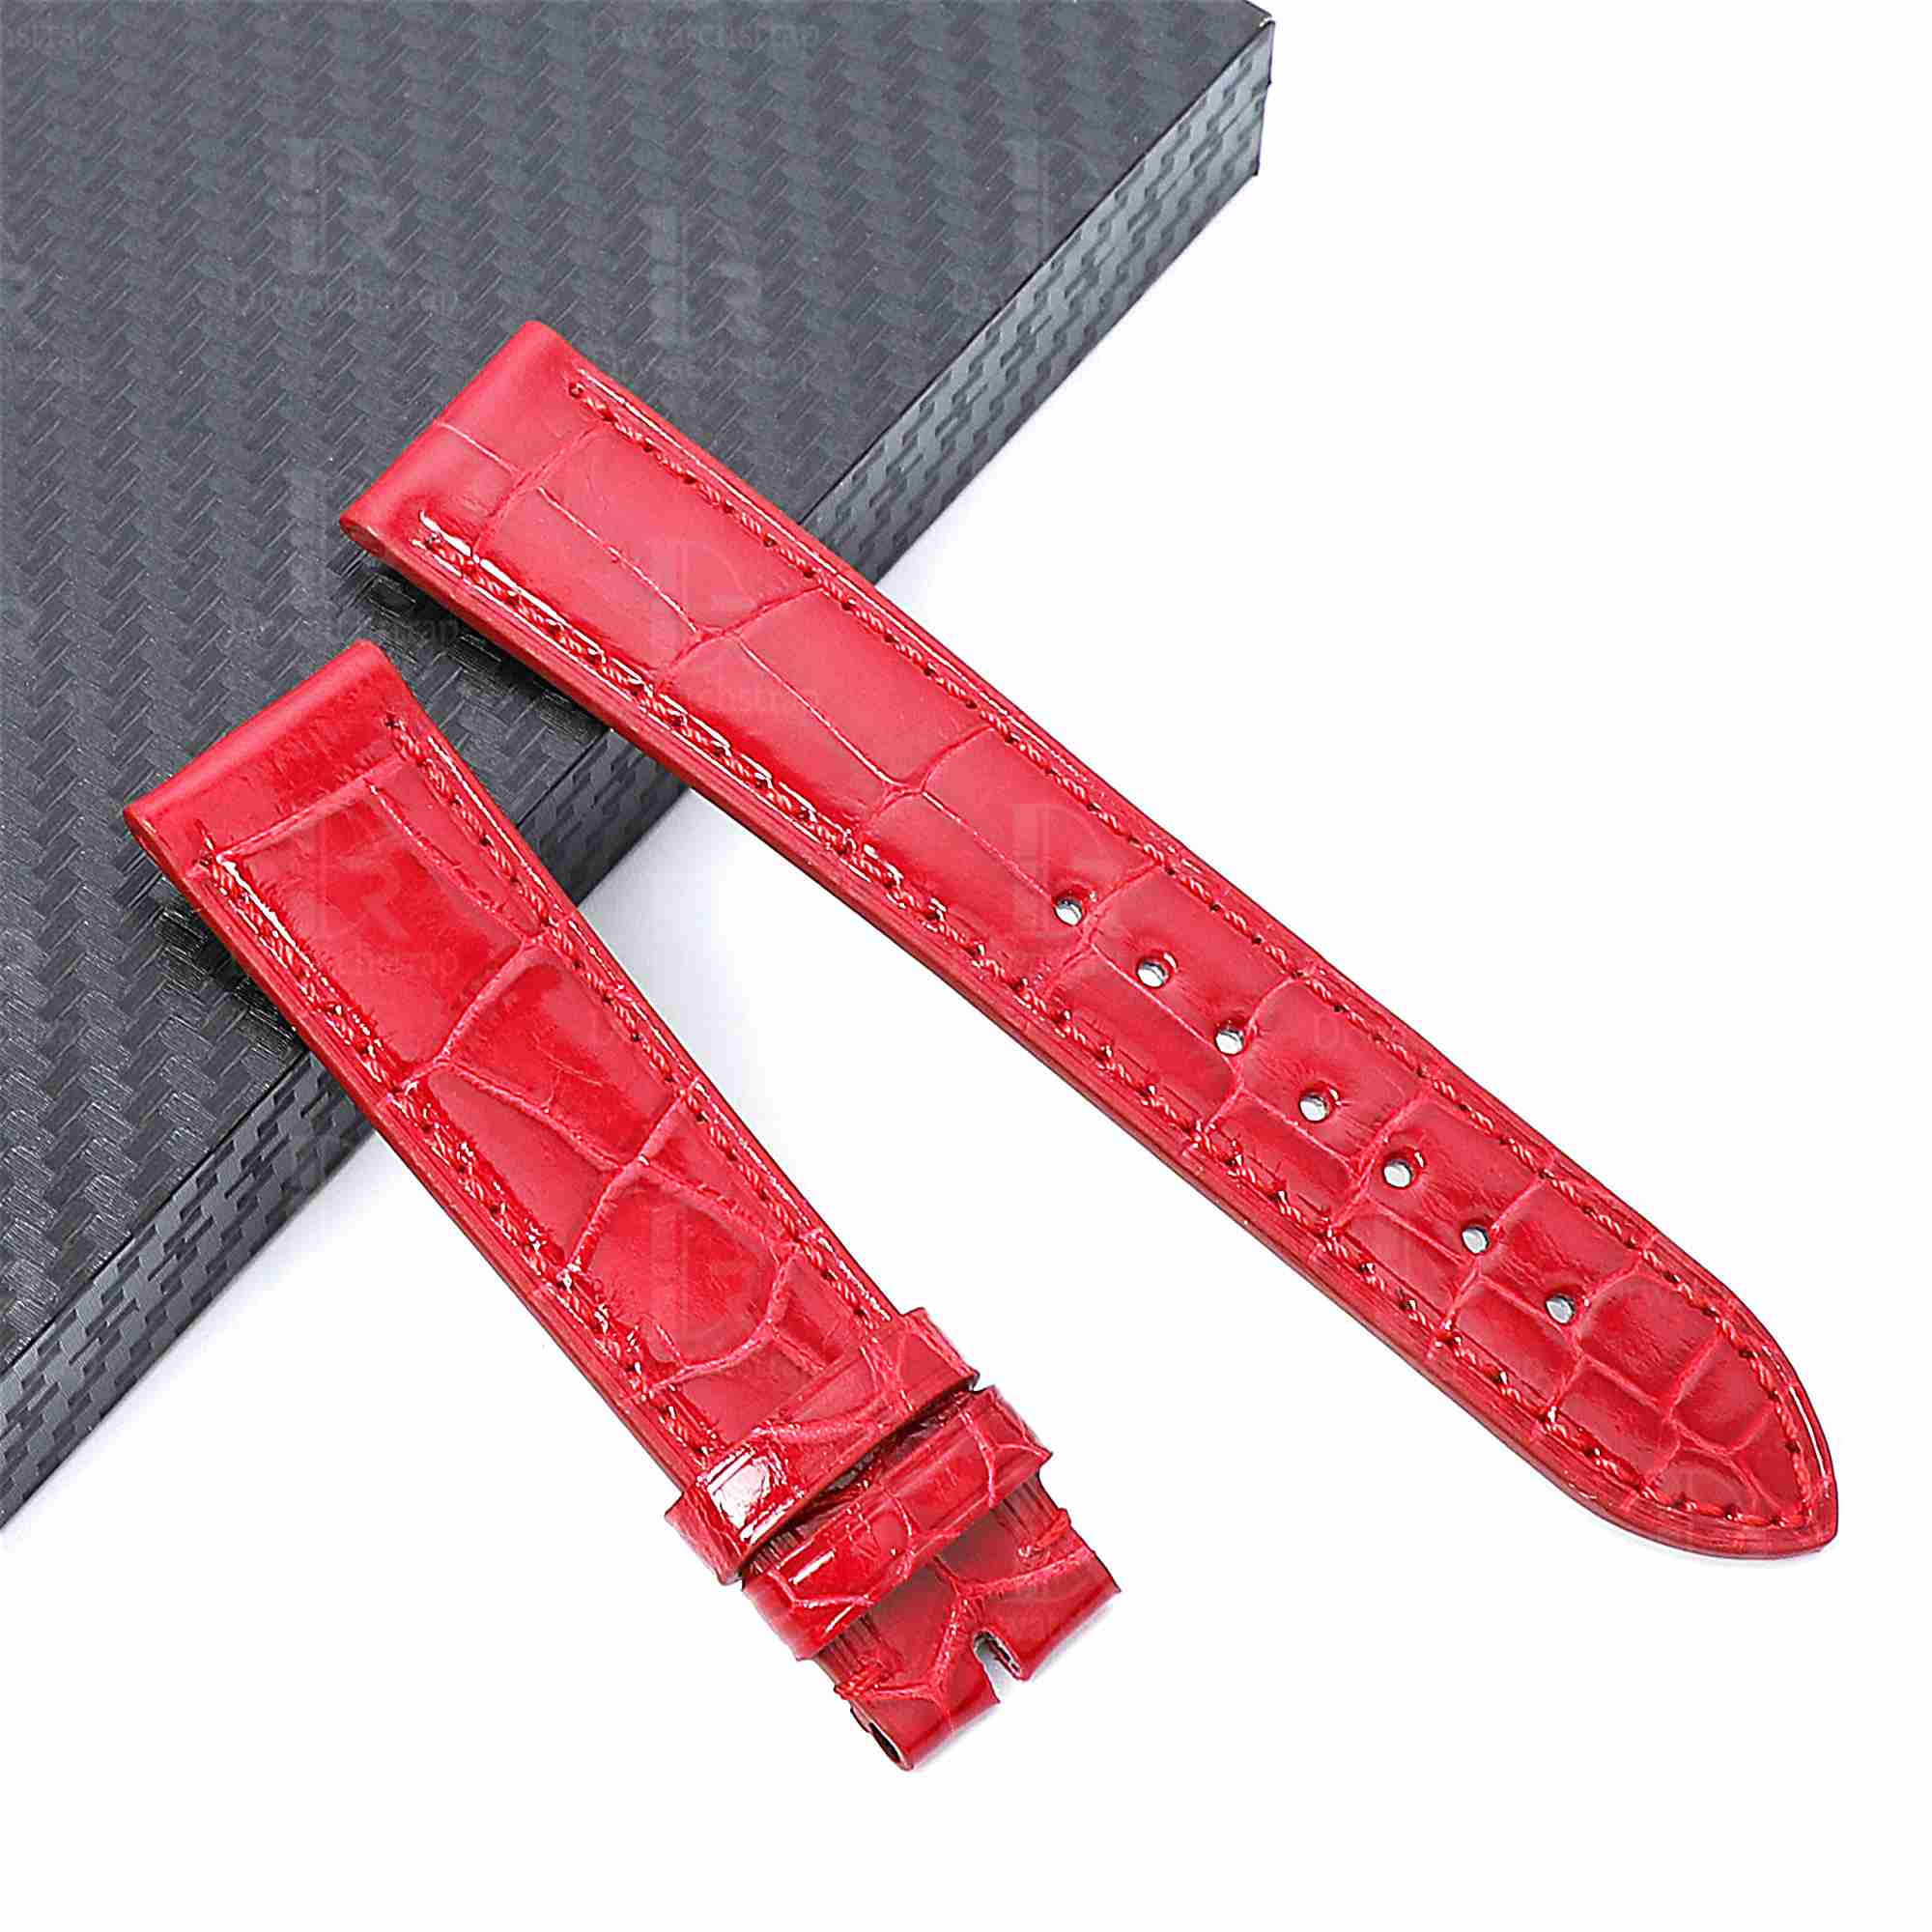 Chopard Happy sport watch band red leather replacement for sale 15mm 18mm